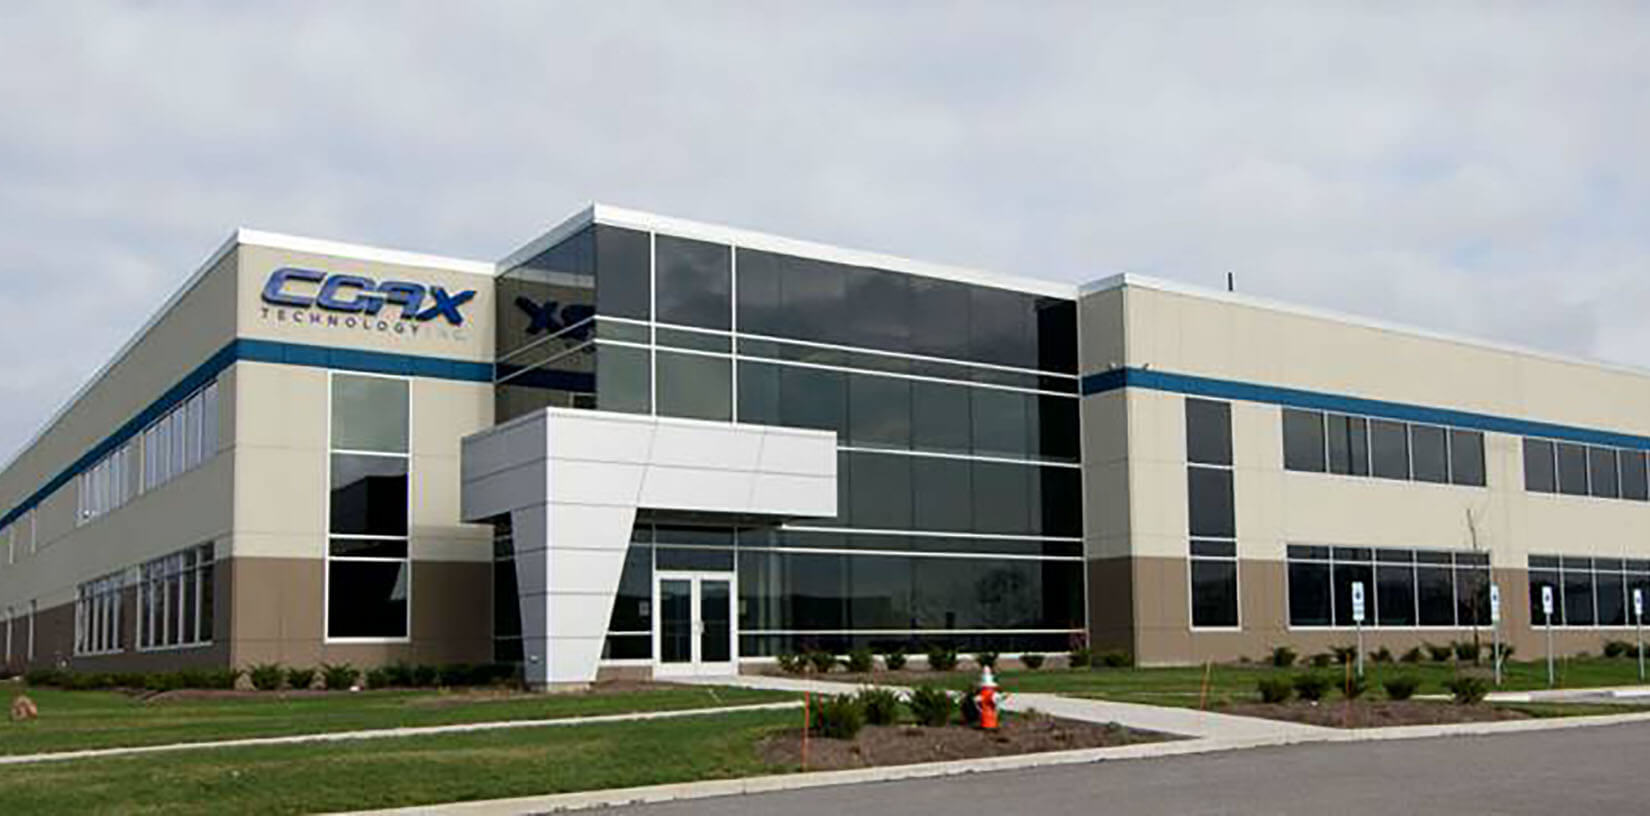 Photograph of CO-AX Technology's headquarters, where their industrial electronics manufacturing takes place